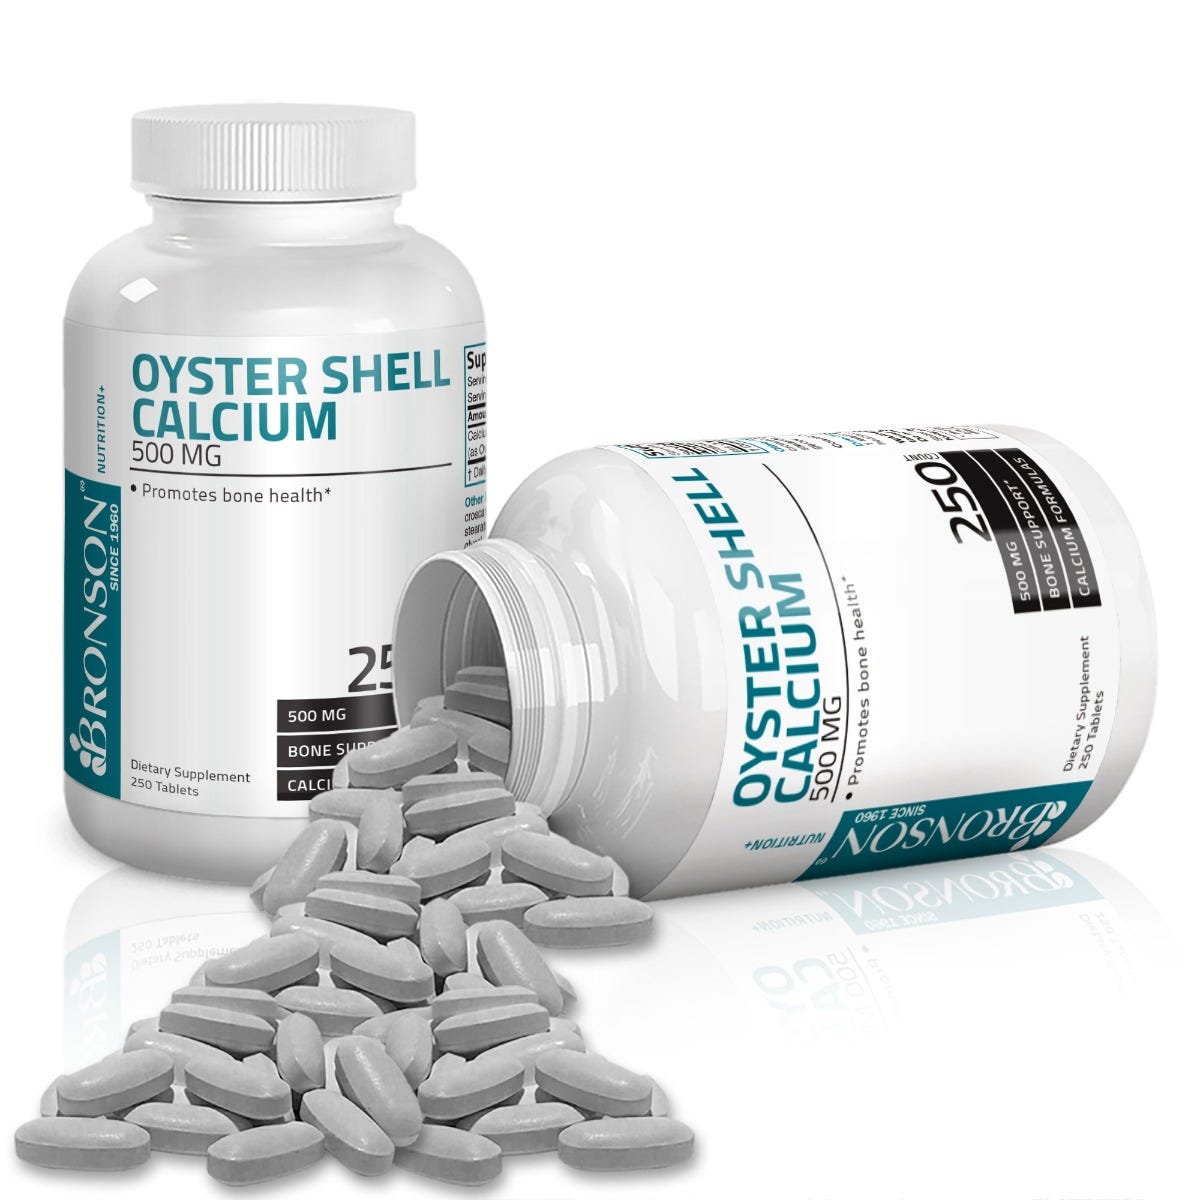 Oyster Shell Calcium - 500 mg - 250 Tablets view 4 of 7